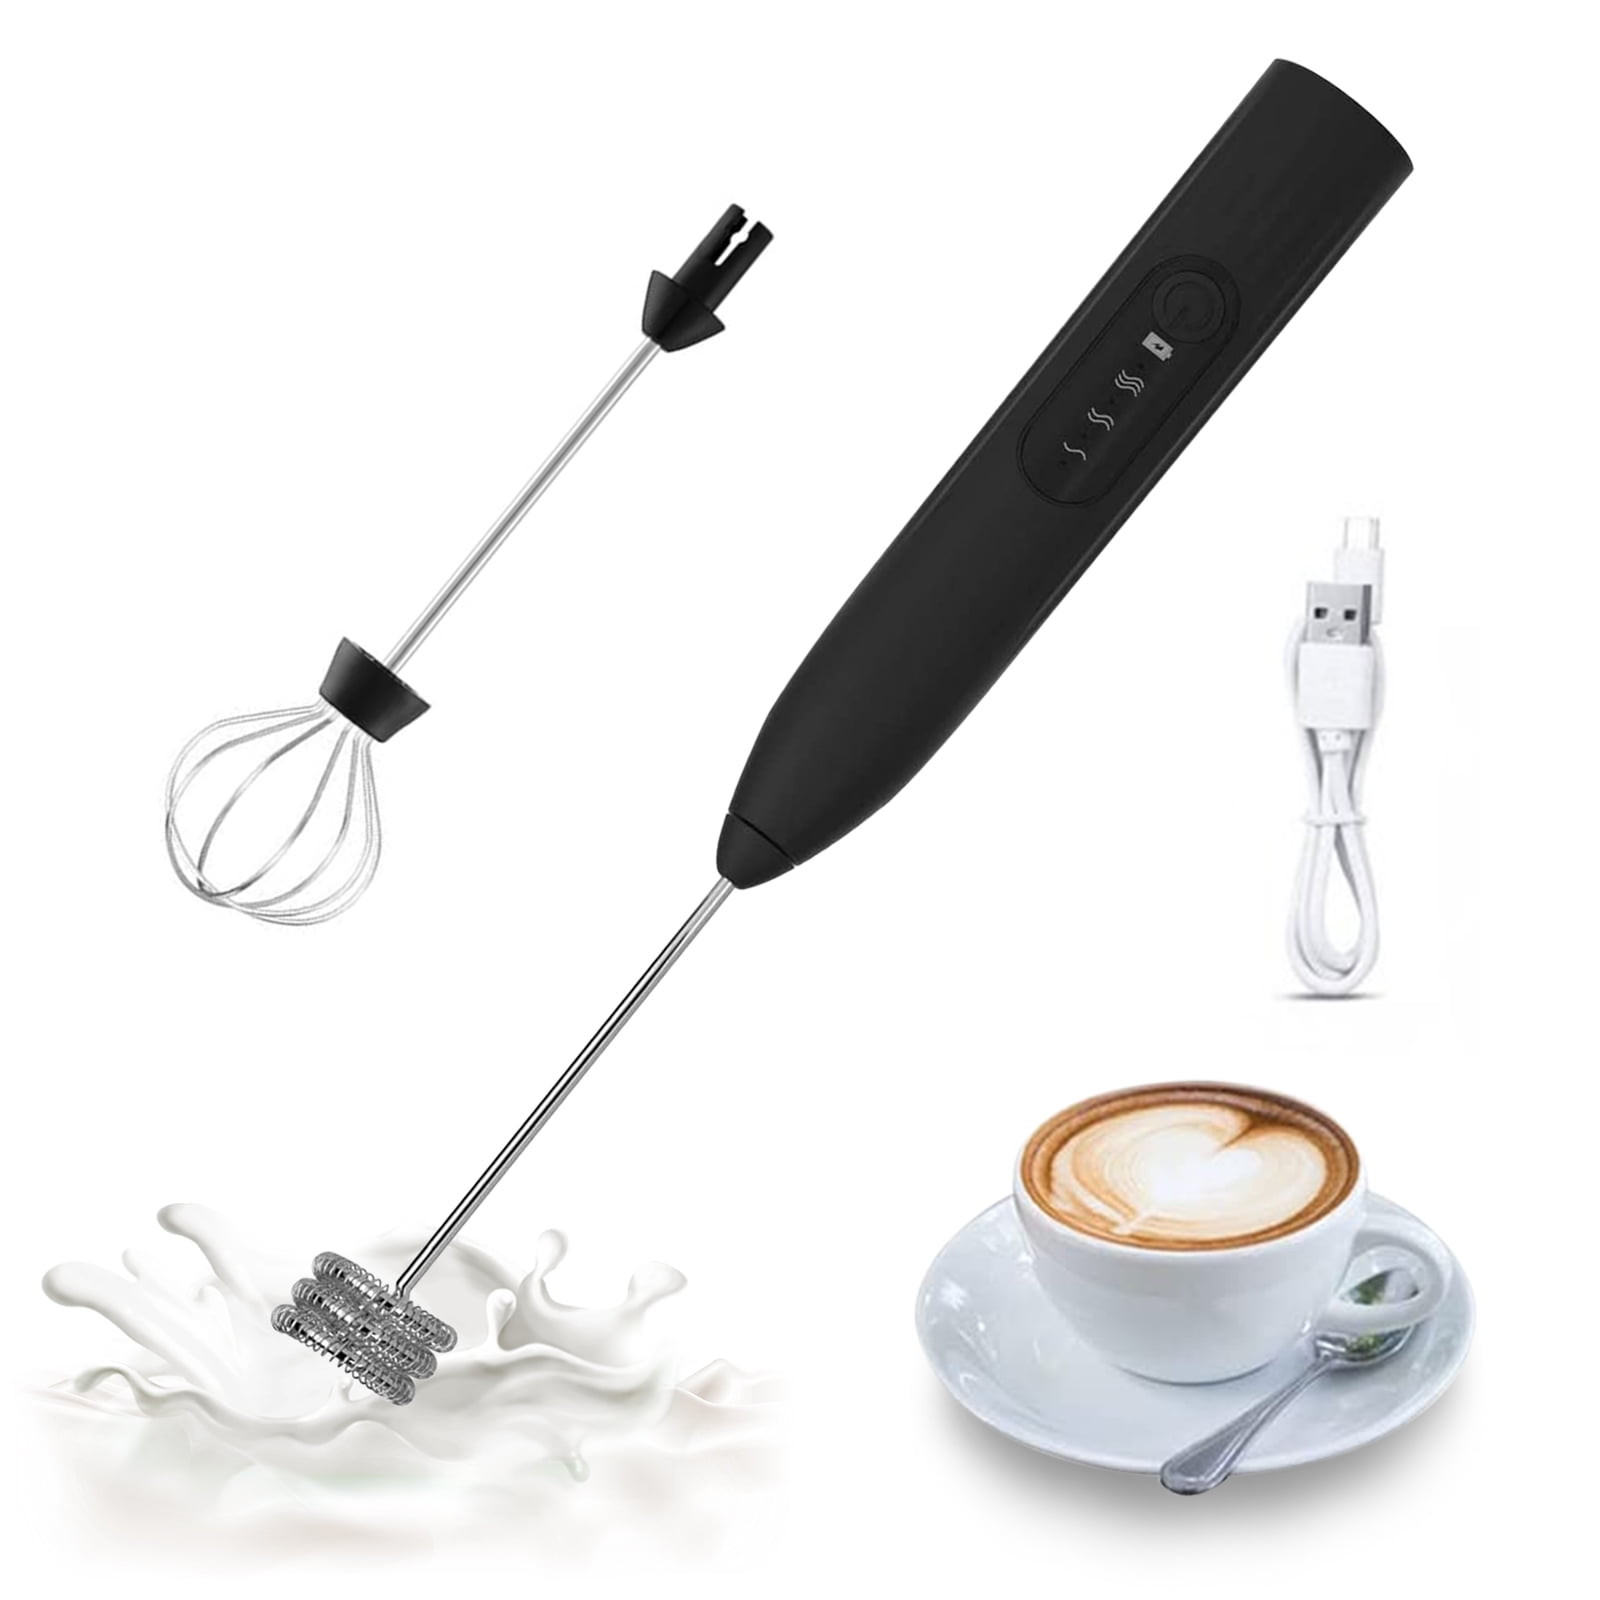  NOOX Milk Frother With Stand, Handheld Egg Mixer Whisk, Milk  Foamer Frother, Mini Blender for Coffee, Coffee, Frappe, Latte, Matcha,  Home & Kitchen Essentials Accessories Improvement Tool Kit - Black: Home